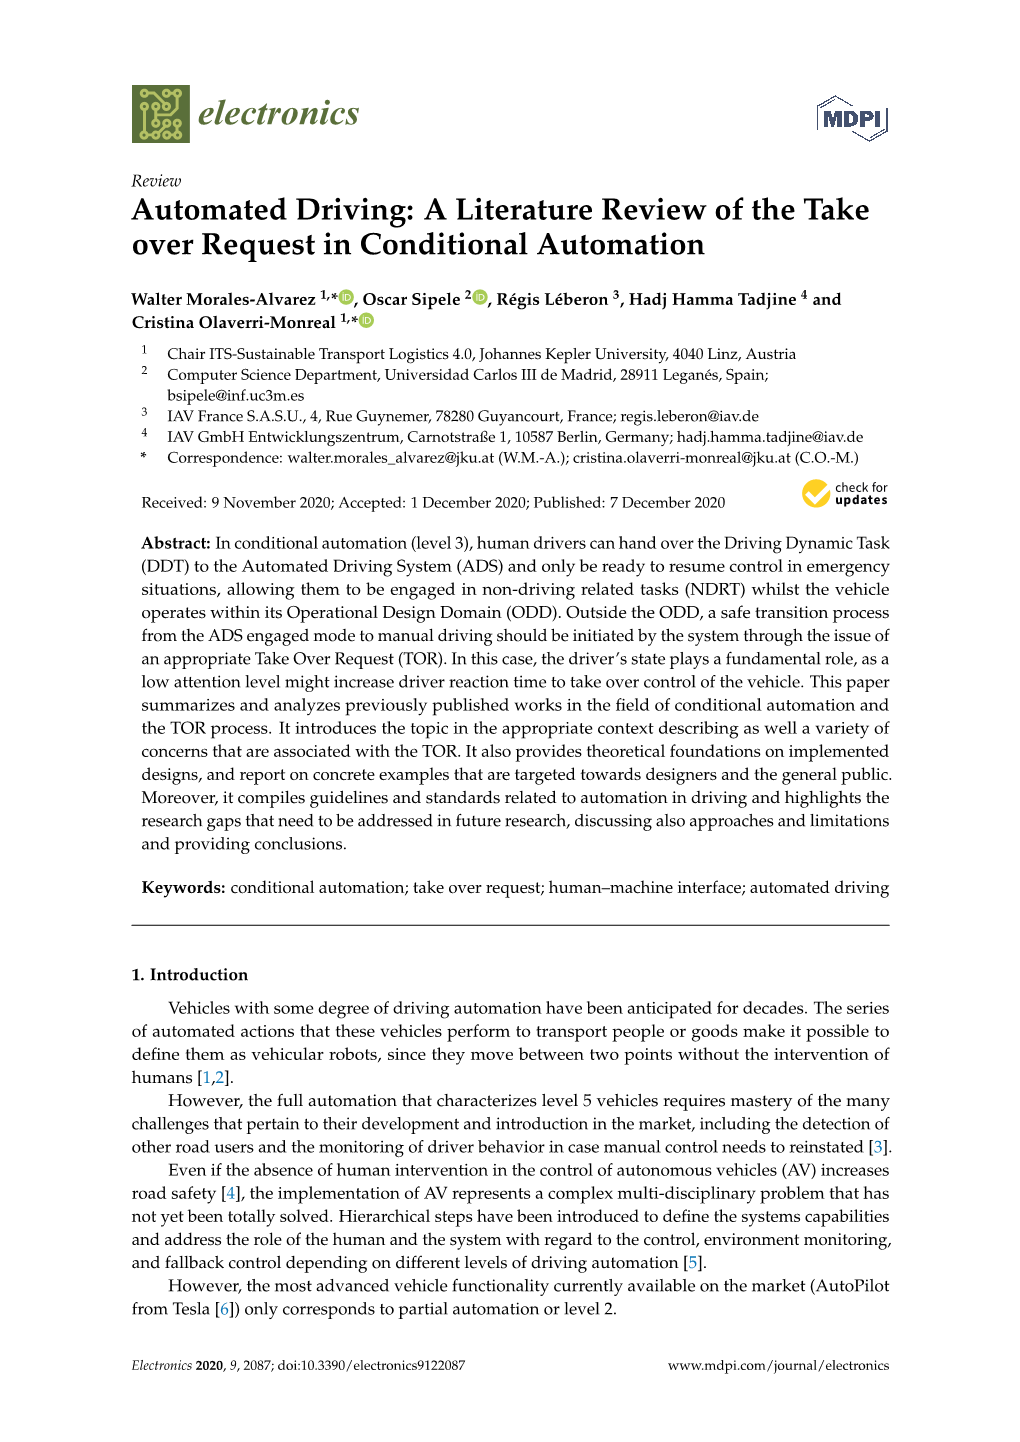 Automated Driving: a Literature Review of the Take Over Request in Conditional Automation